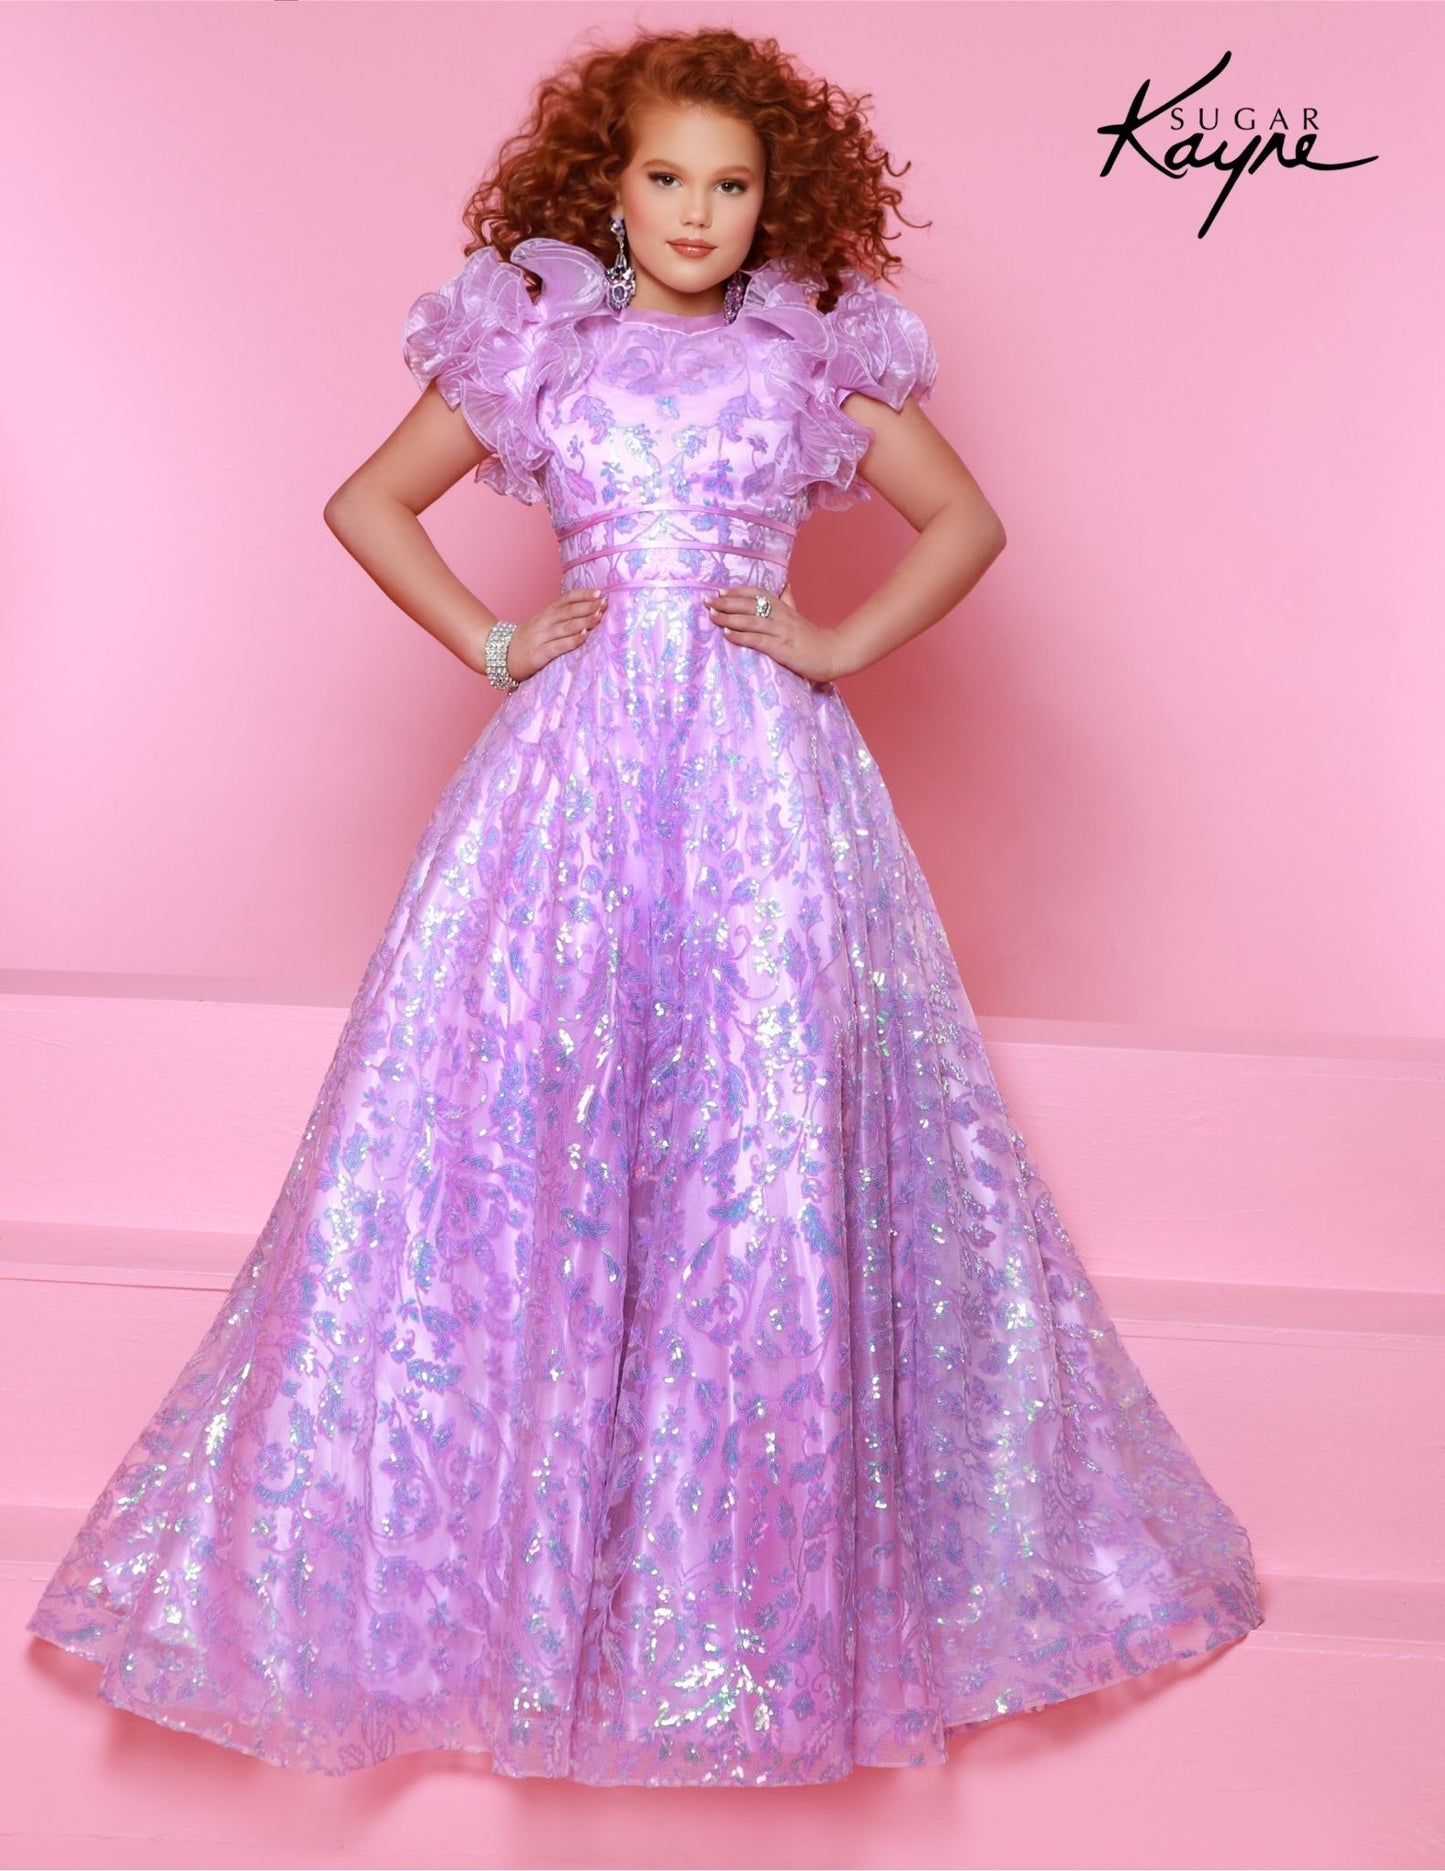 The Sugar Kayne C340 Long Girls Preteen Pageant Dress is an elegant A-line ballgown with exquisite sequin and ruffle sleeves. Crafted from beautiful fabric, this dress is perfect for any special occasion. Dance under the stars in this darling sequin mesh ballgown. The graceful ruffle sleeves create a magical and charming look.